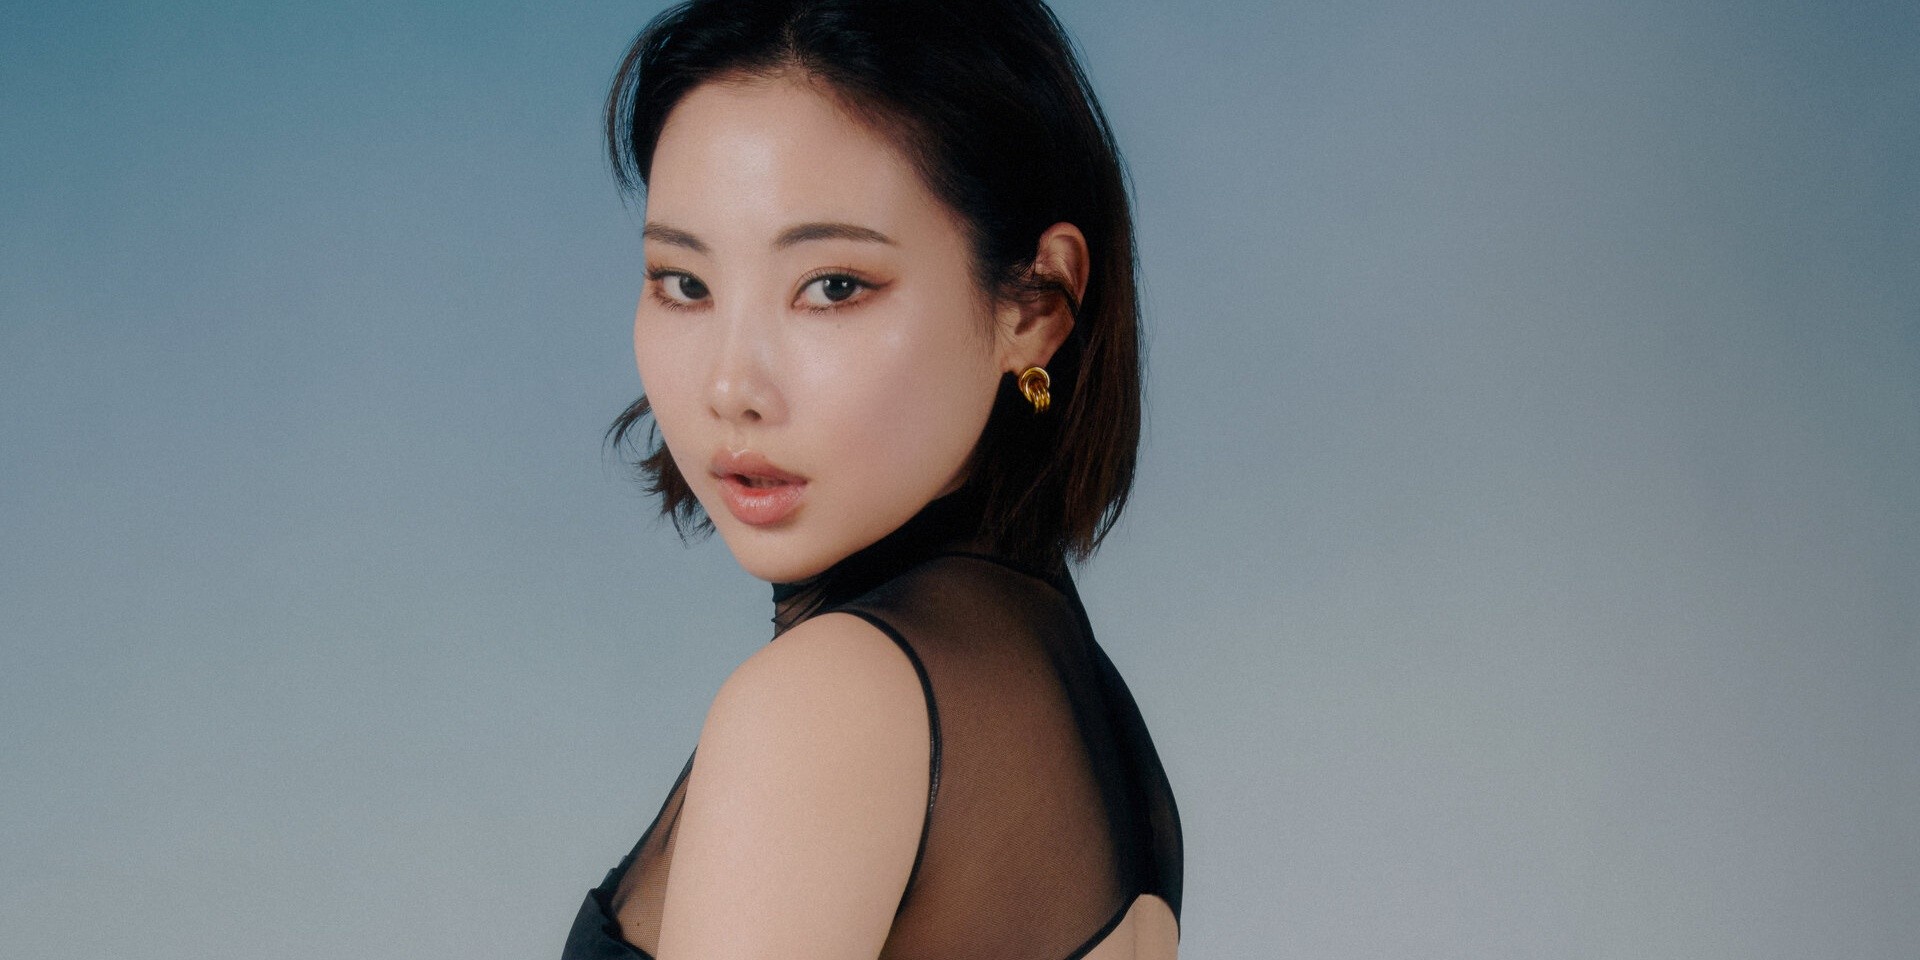 Asia Spotlight: Korean singer-songwriter youra talks pursuing music and the story behind her latest single 'Rawww'